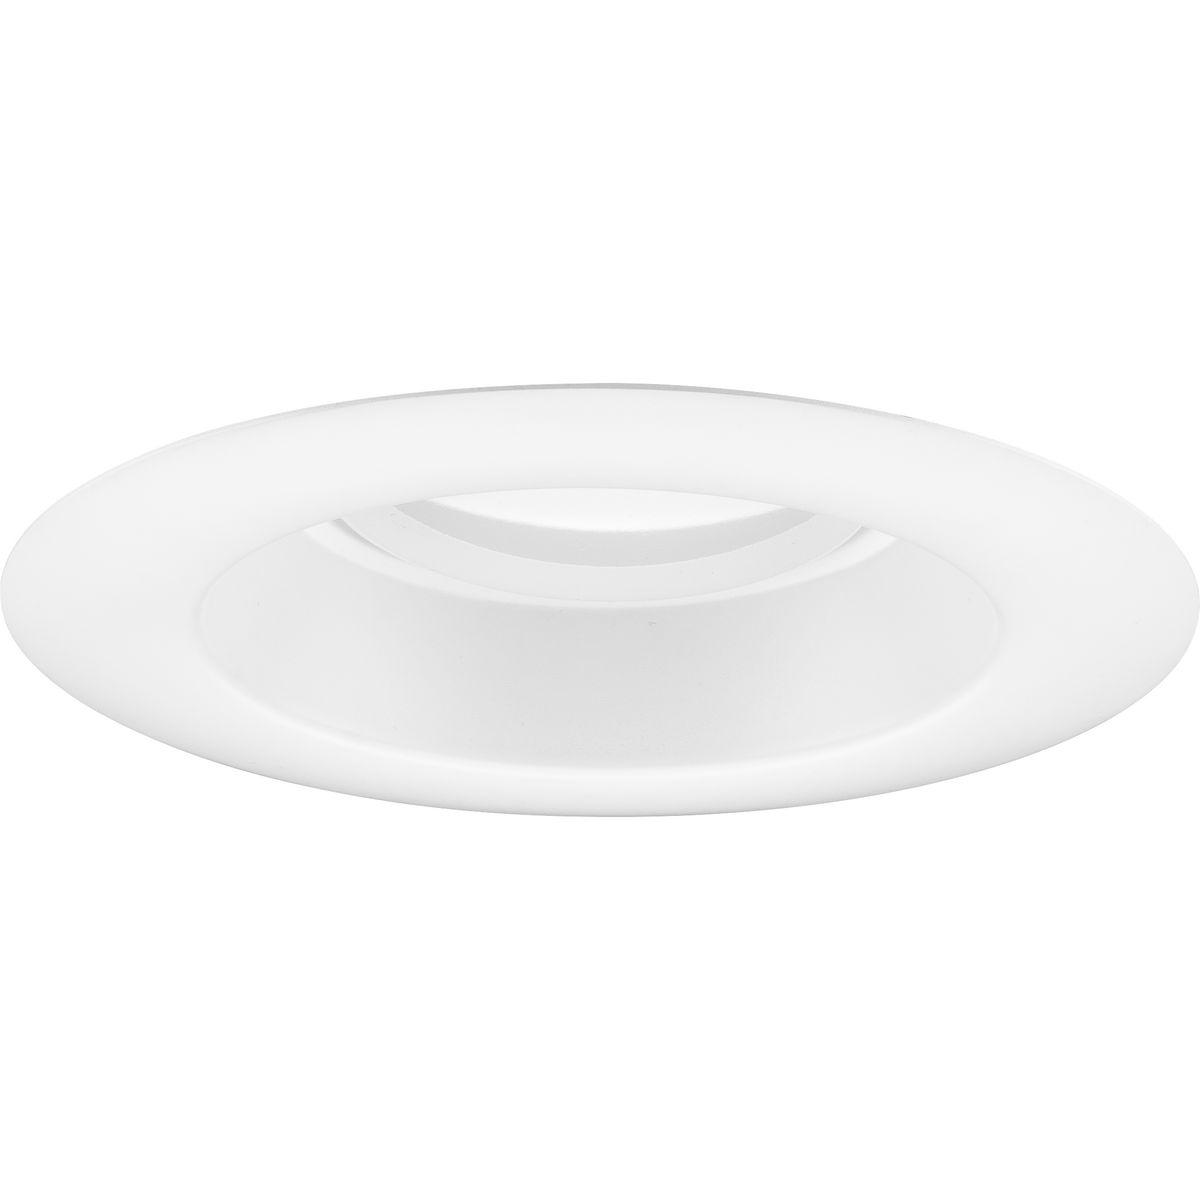 Hubbell P800018-028-CS Elevate any room's design with the Intrinsic Collection 1-Light Satin White Modern Recessed LED Eyeball Downlight. The smooth trim ring is coated in a crisp satin white finish. The adjustable integrated LED emits general ambient lighting. The non-metallic